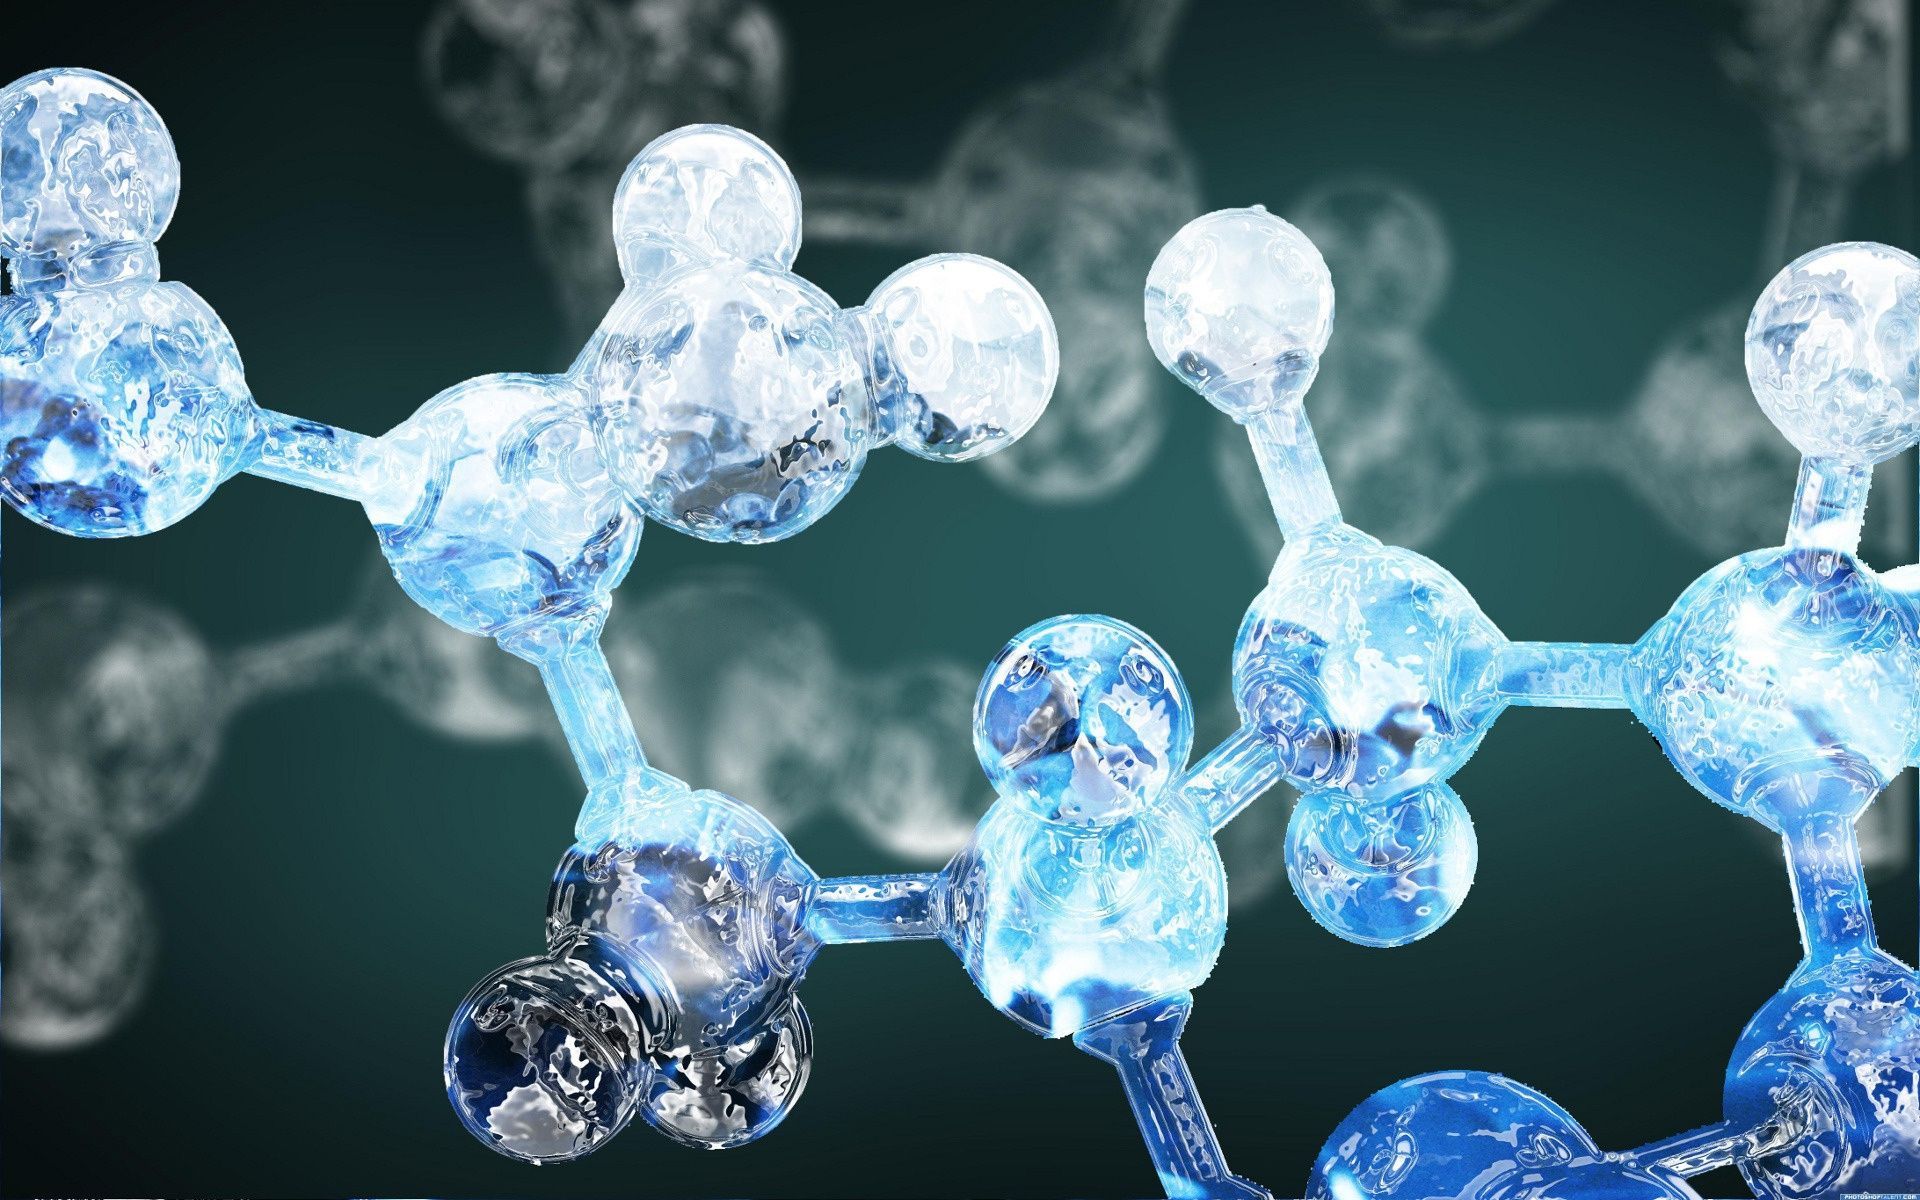 A blue and white molecule with ice crystals - Chemistry